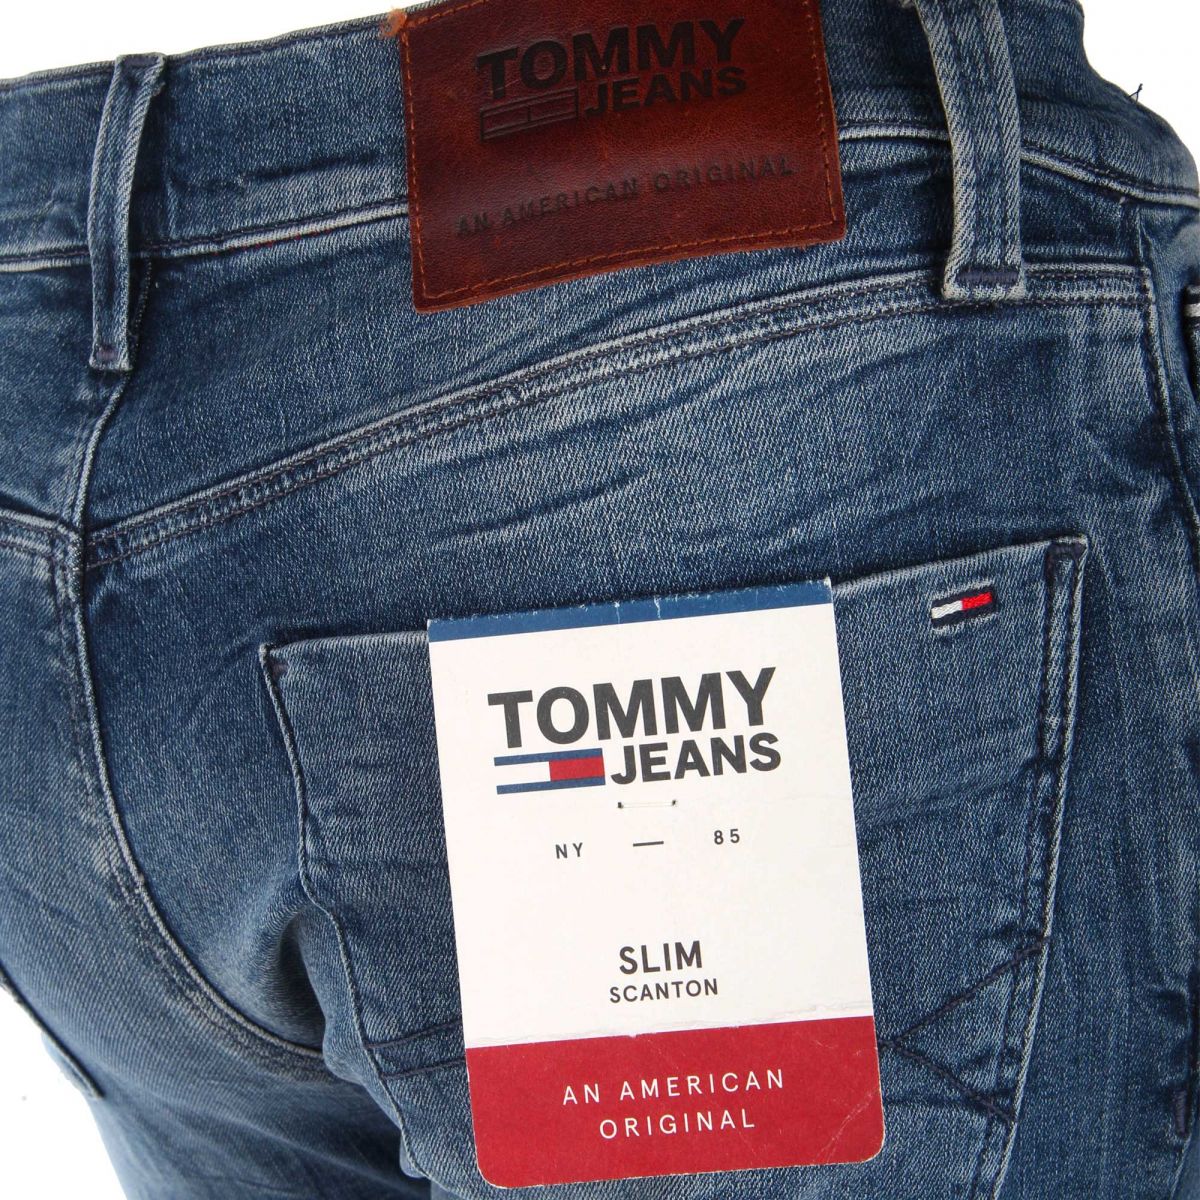 tommy jeans an american original